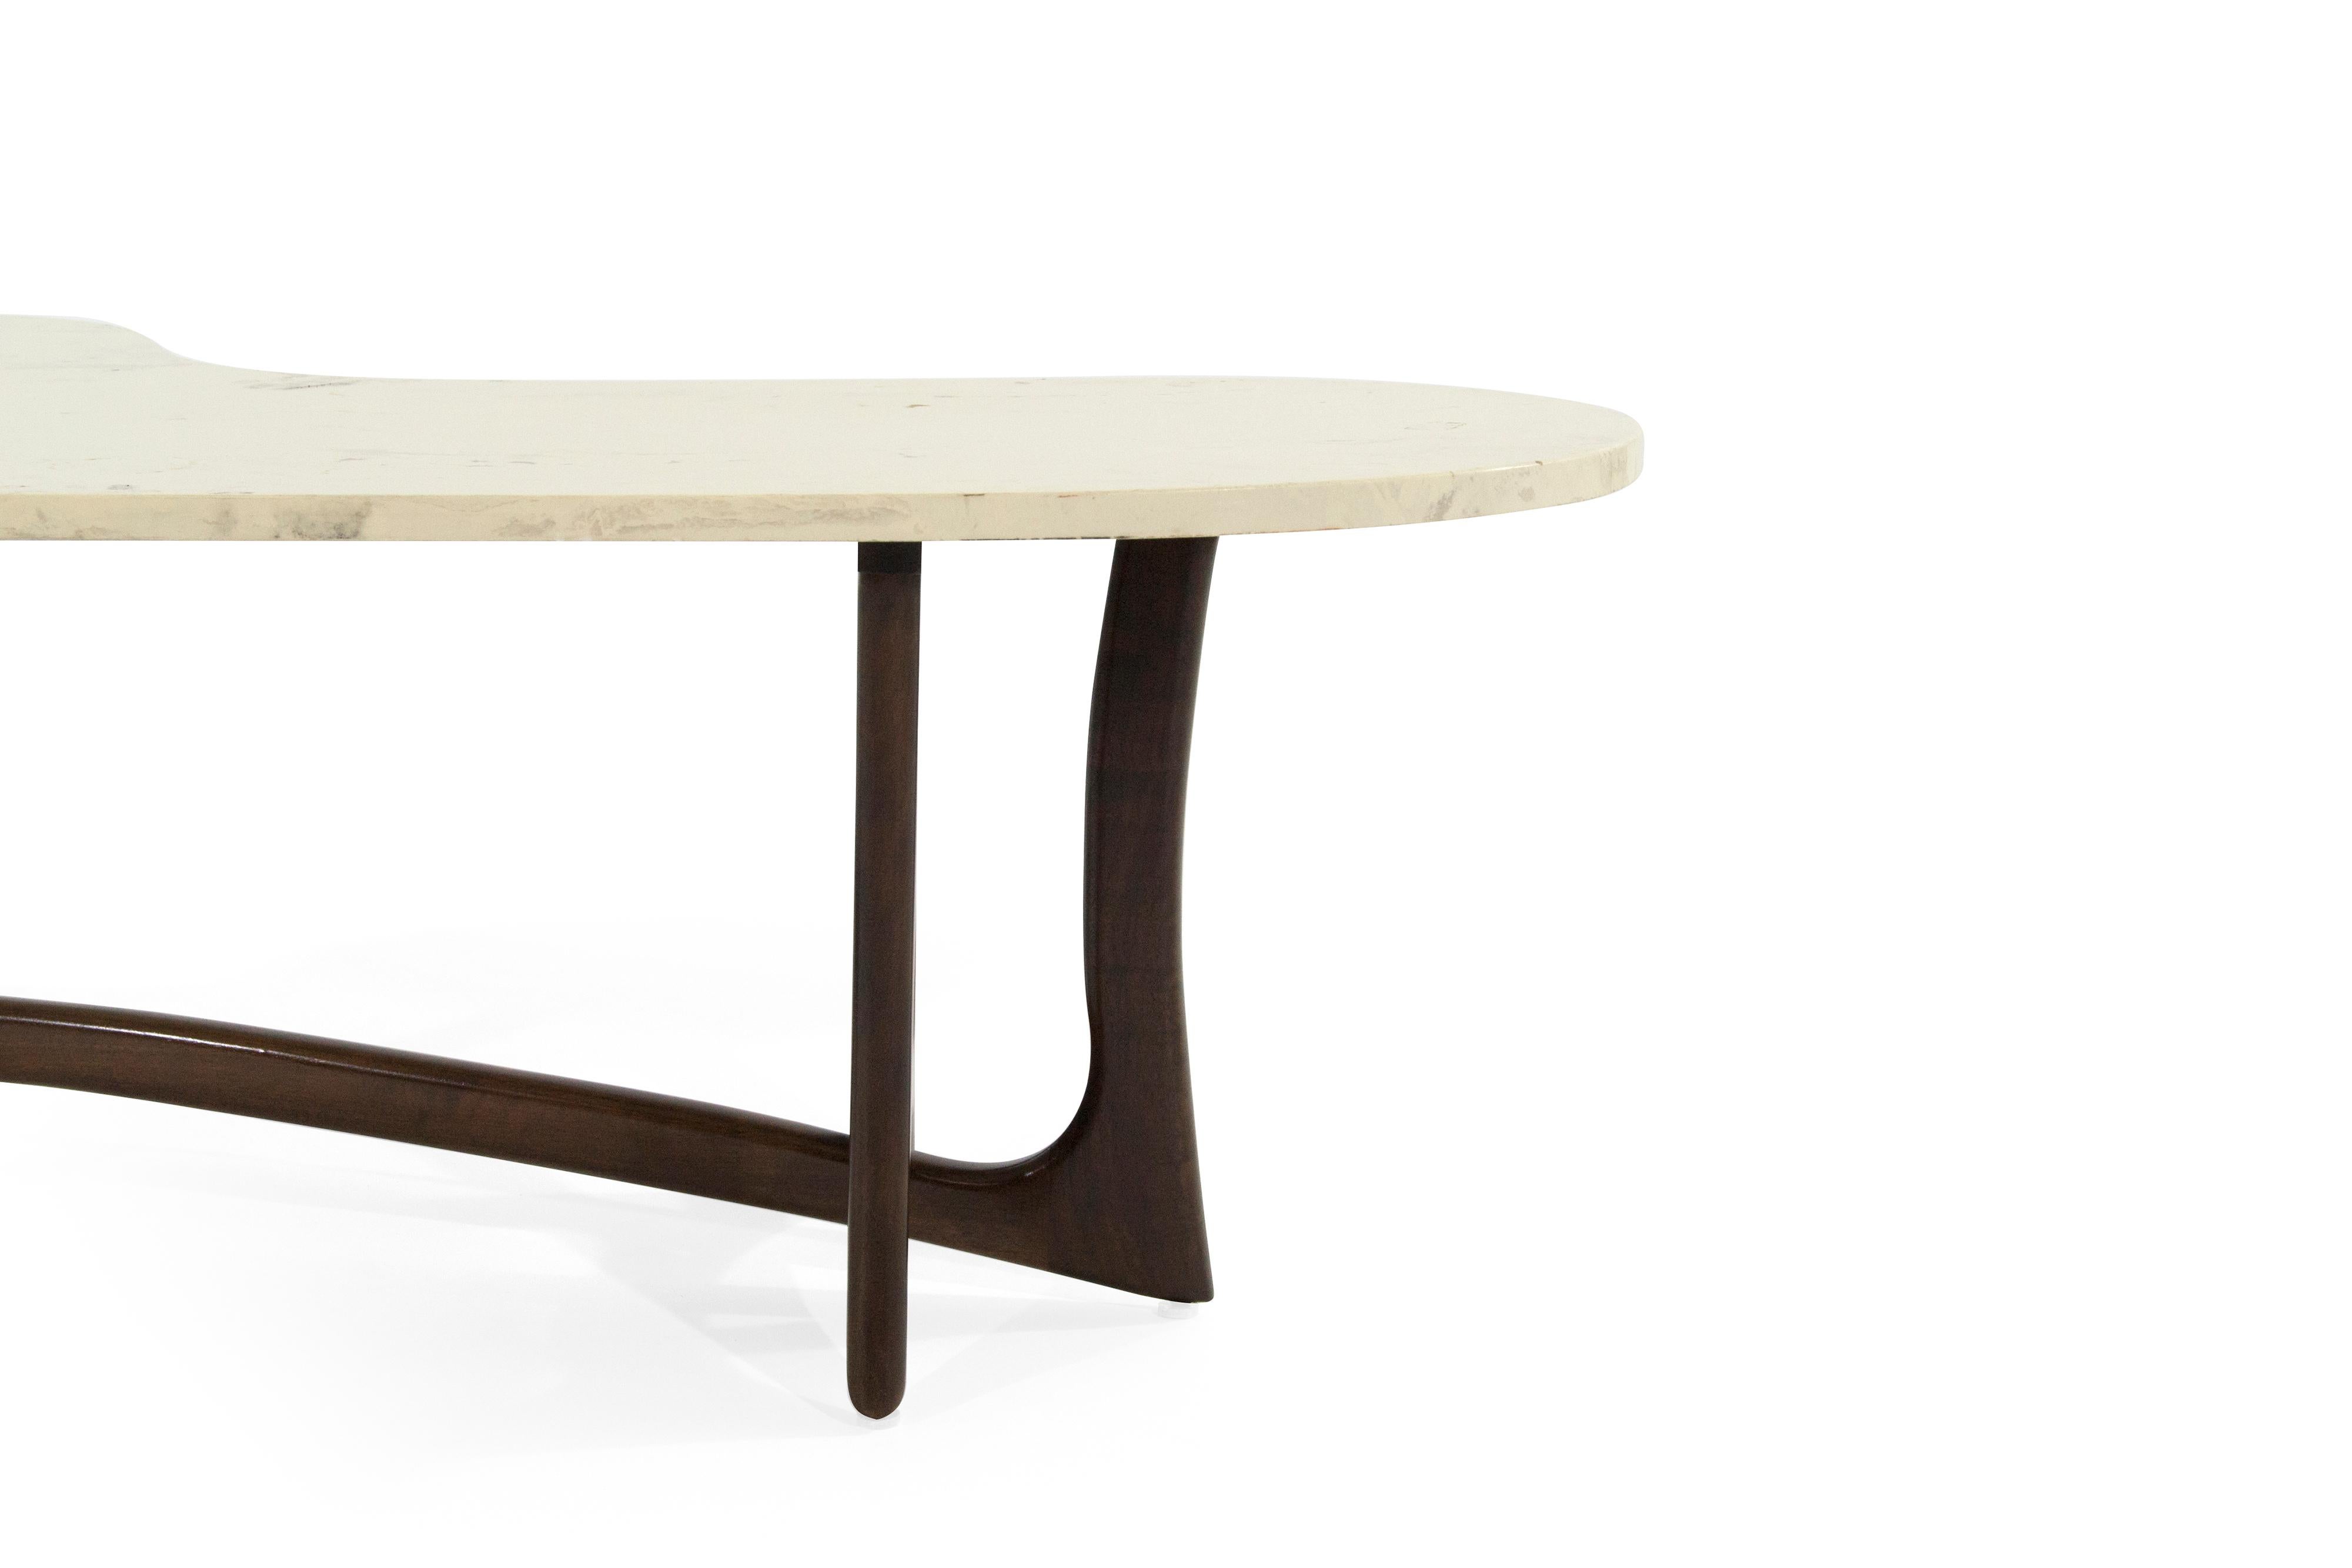 20th Century Asymmetric Marble-Top Coffee Table by Adrian Pearsall